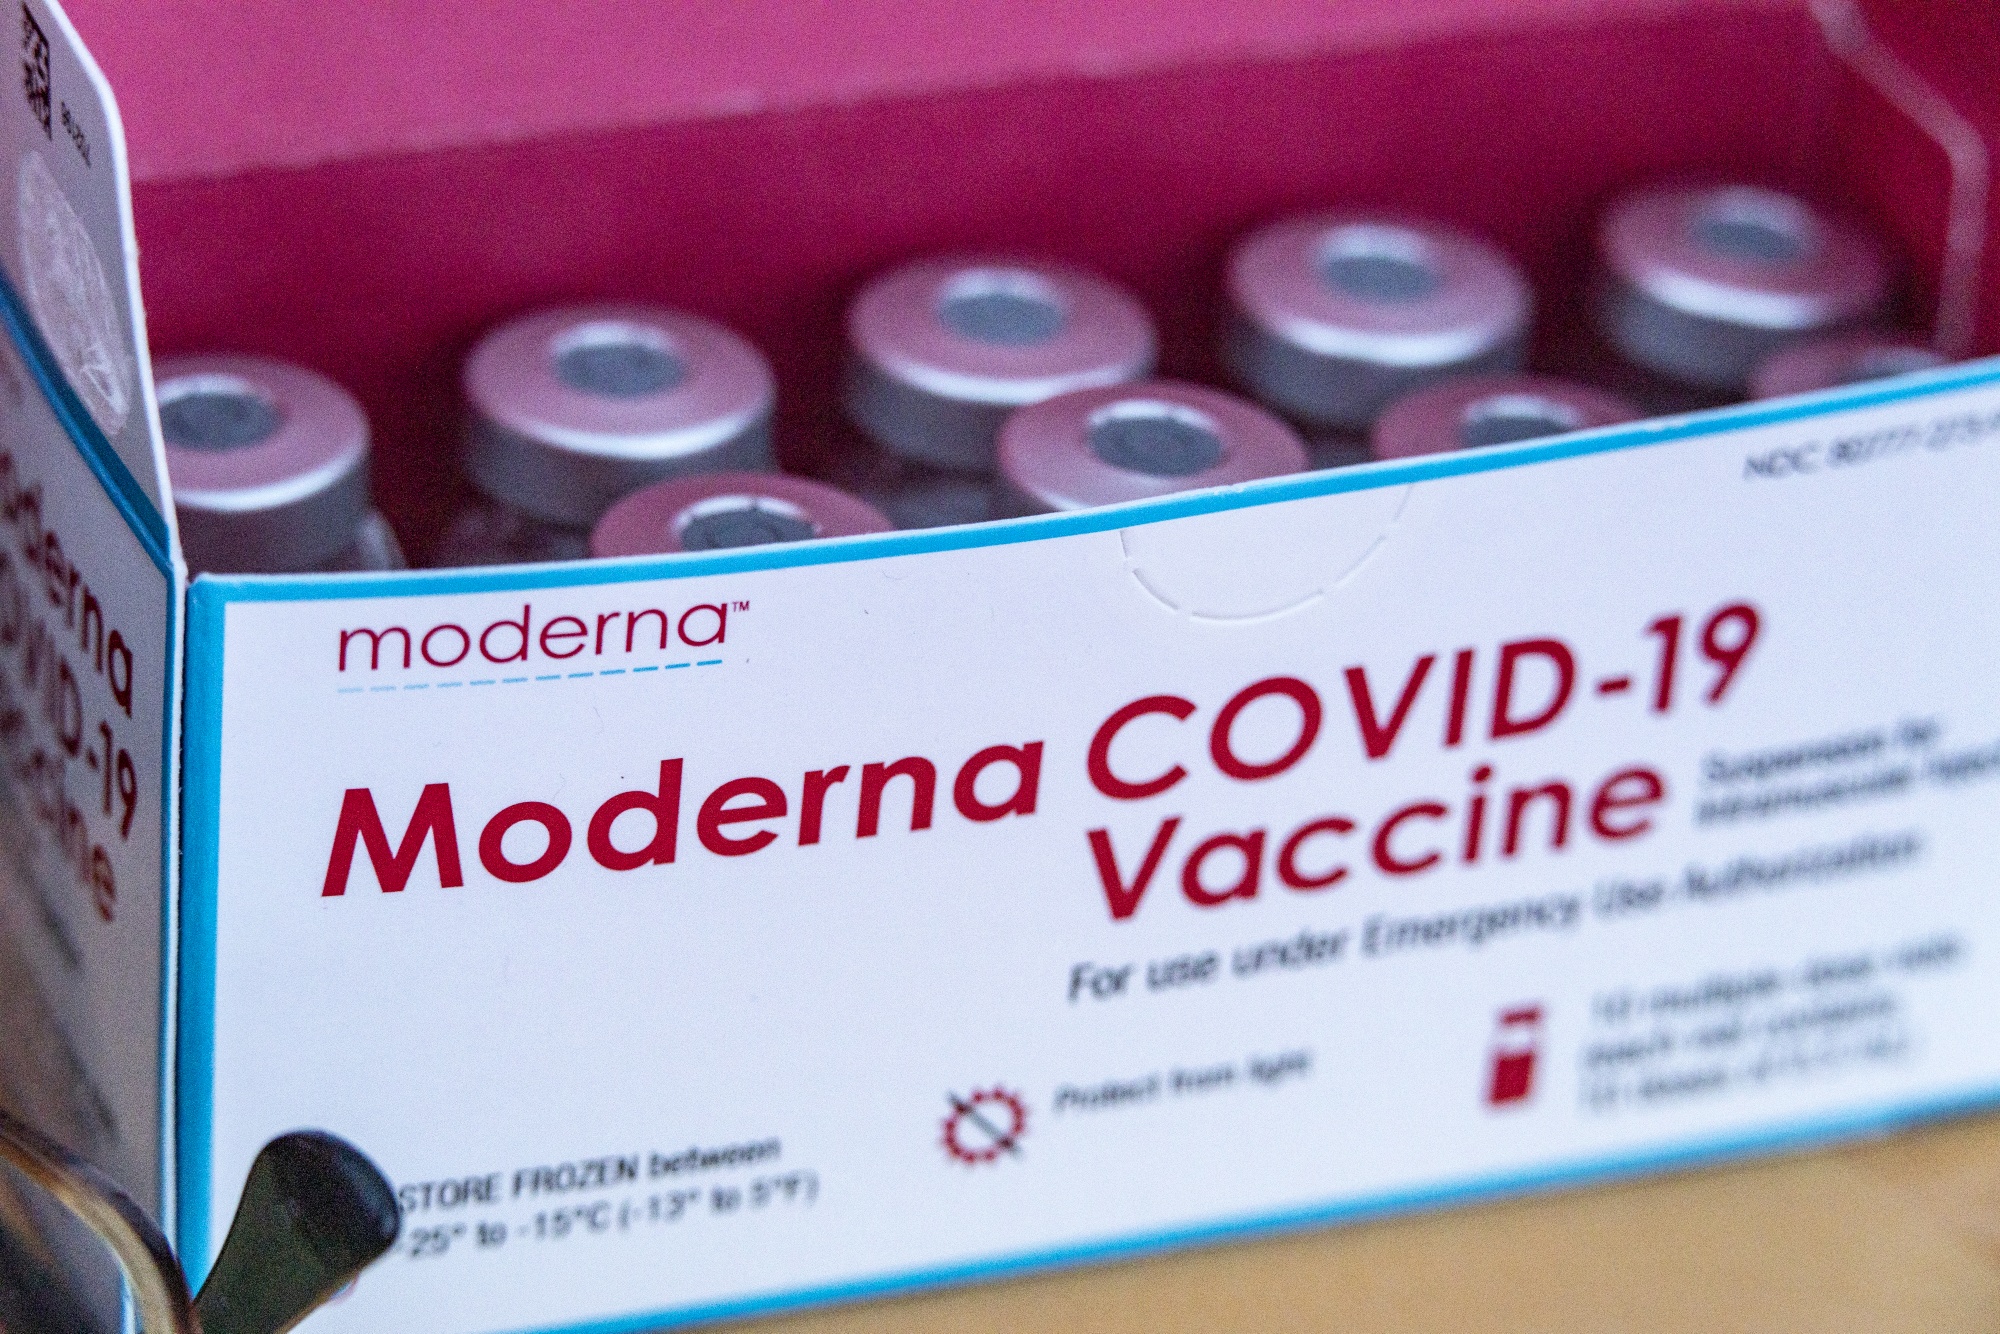 A box of the Moderna Covid-19 vaccine vials at a drive-thru vaccination site at the Meigs County fairgrounds in Pomeroy, Ohio, U.S., on Thursday, March 18, 2021. President Joe Biden is poised to meet his goal of delivering 100 million Covid-19 vaccine shots in his first 100 days in office as soon as Thursday, reaching the milestone more than a month ahead of time.